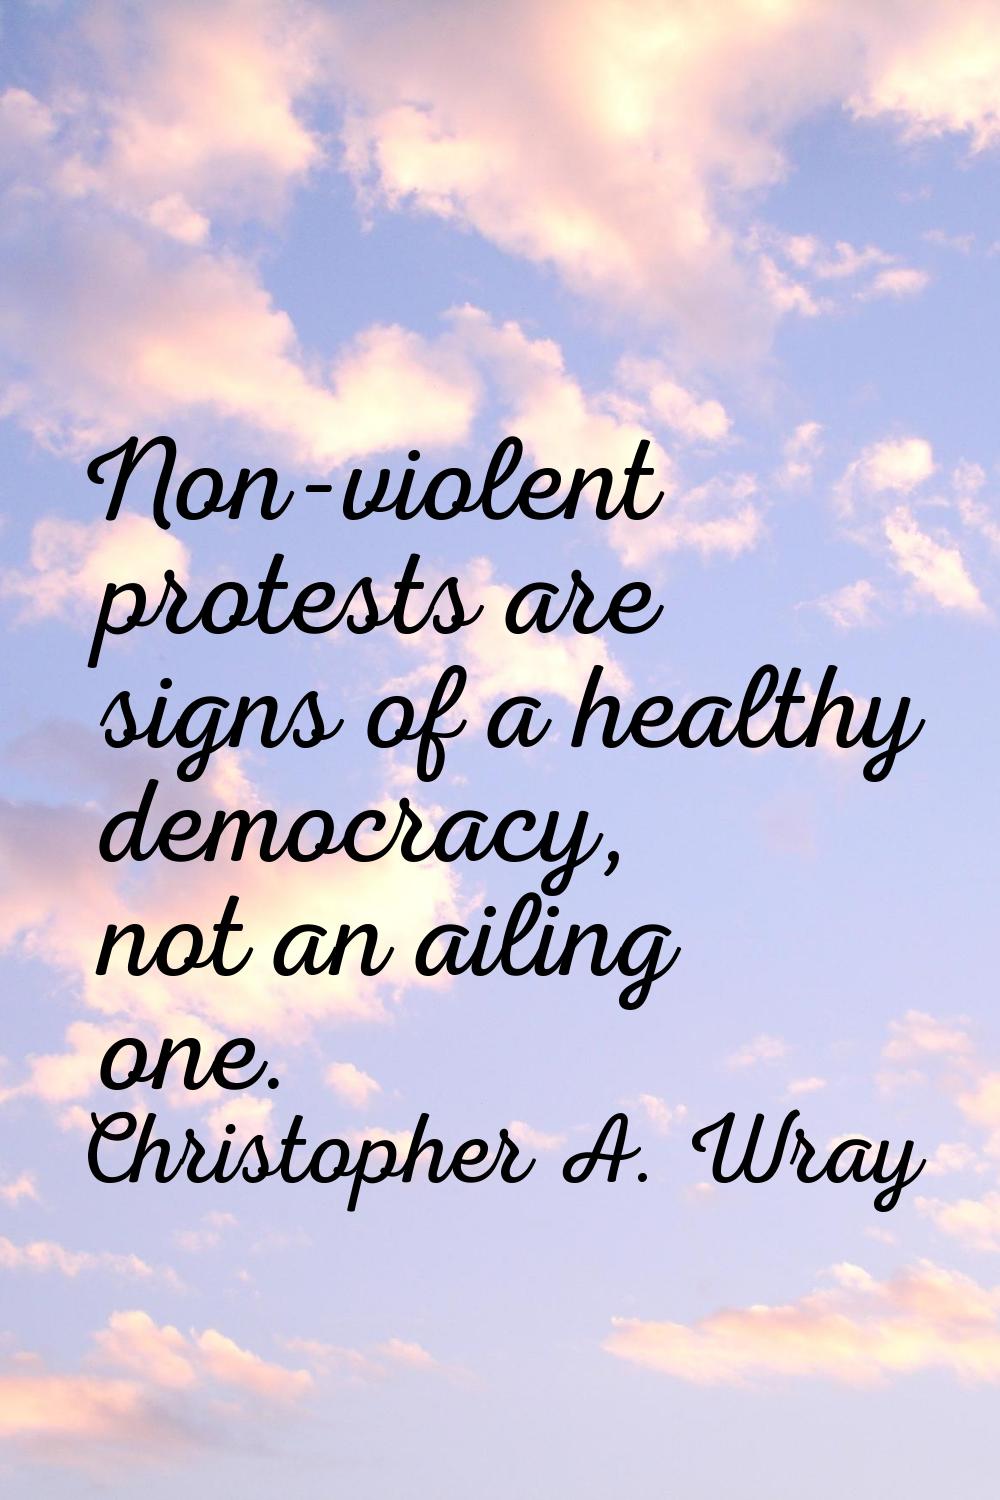 Non-violent protests are signs of a healthy democracy, not an ailing one.